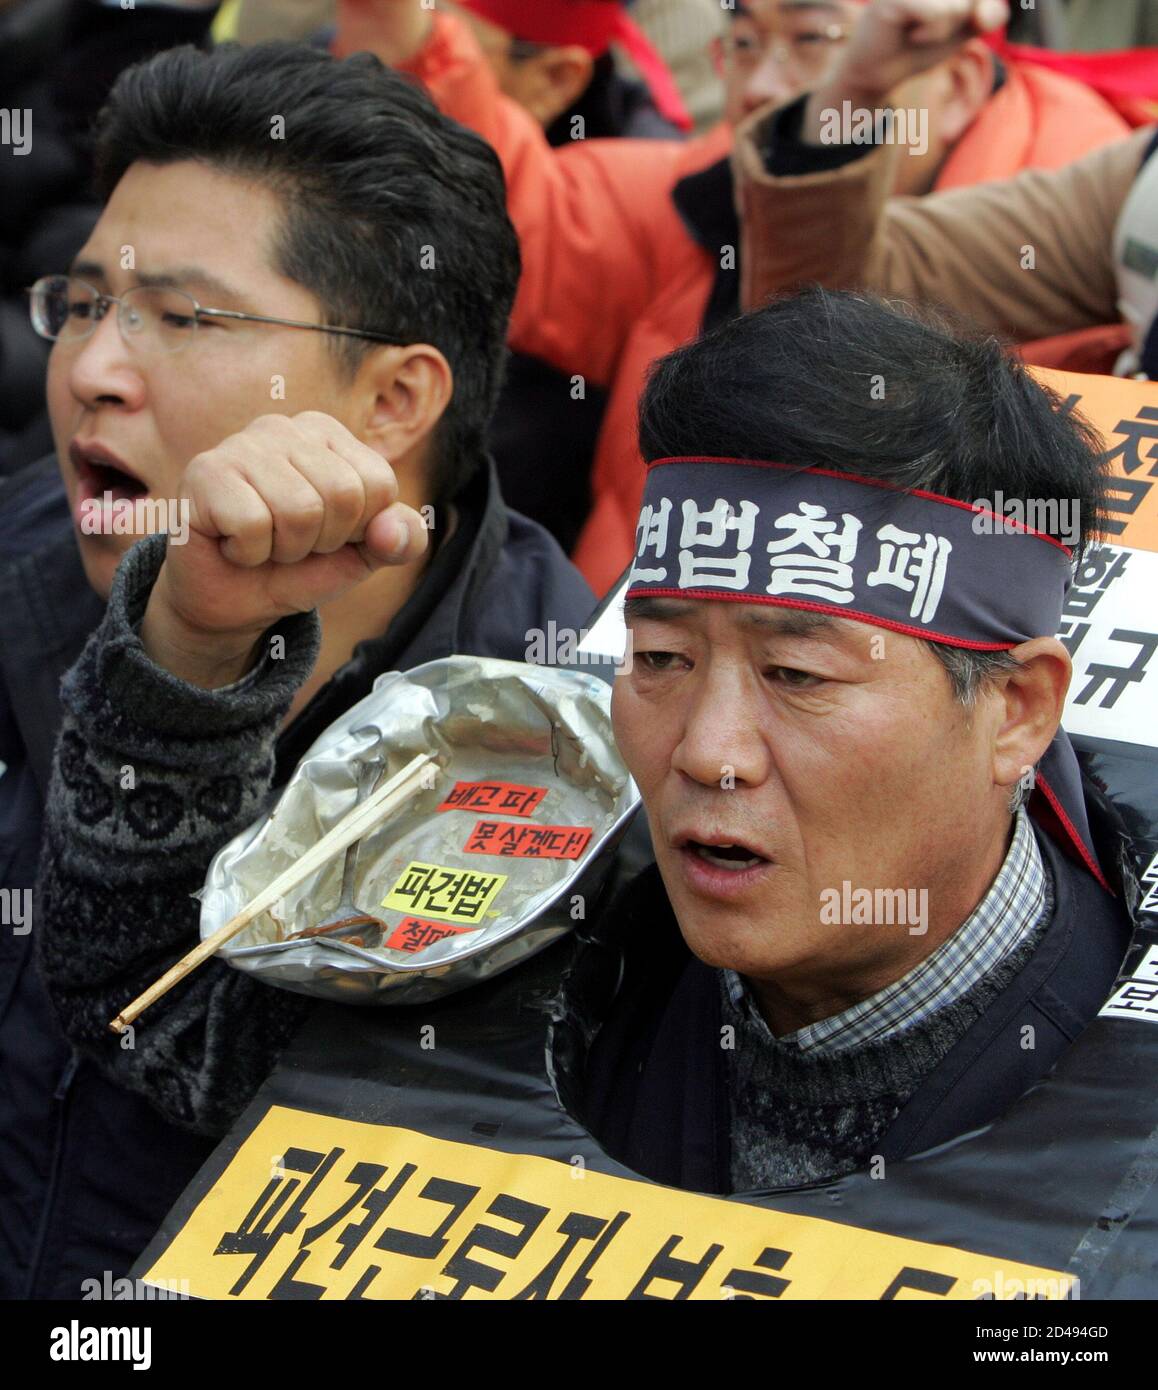 Wearing the mock stocks and a bowl with chopsticks and a spoon, a South Korean temporary worker chants anti-government sloagns at a rally near parliament in Seoul November 24, 2004. About 400 unionised temporary workers rallied in Seoul on Wednesday to oppose a government-driven law, which they insist would worsen their working conditions. REUTERS/You Sung-Ho  YSH/SH Stock Photo